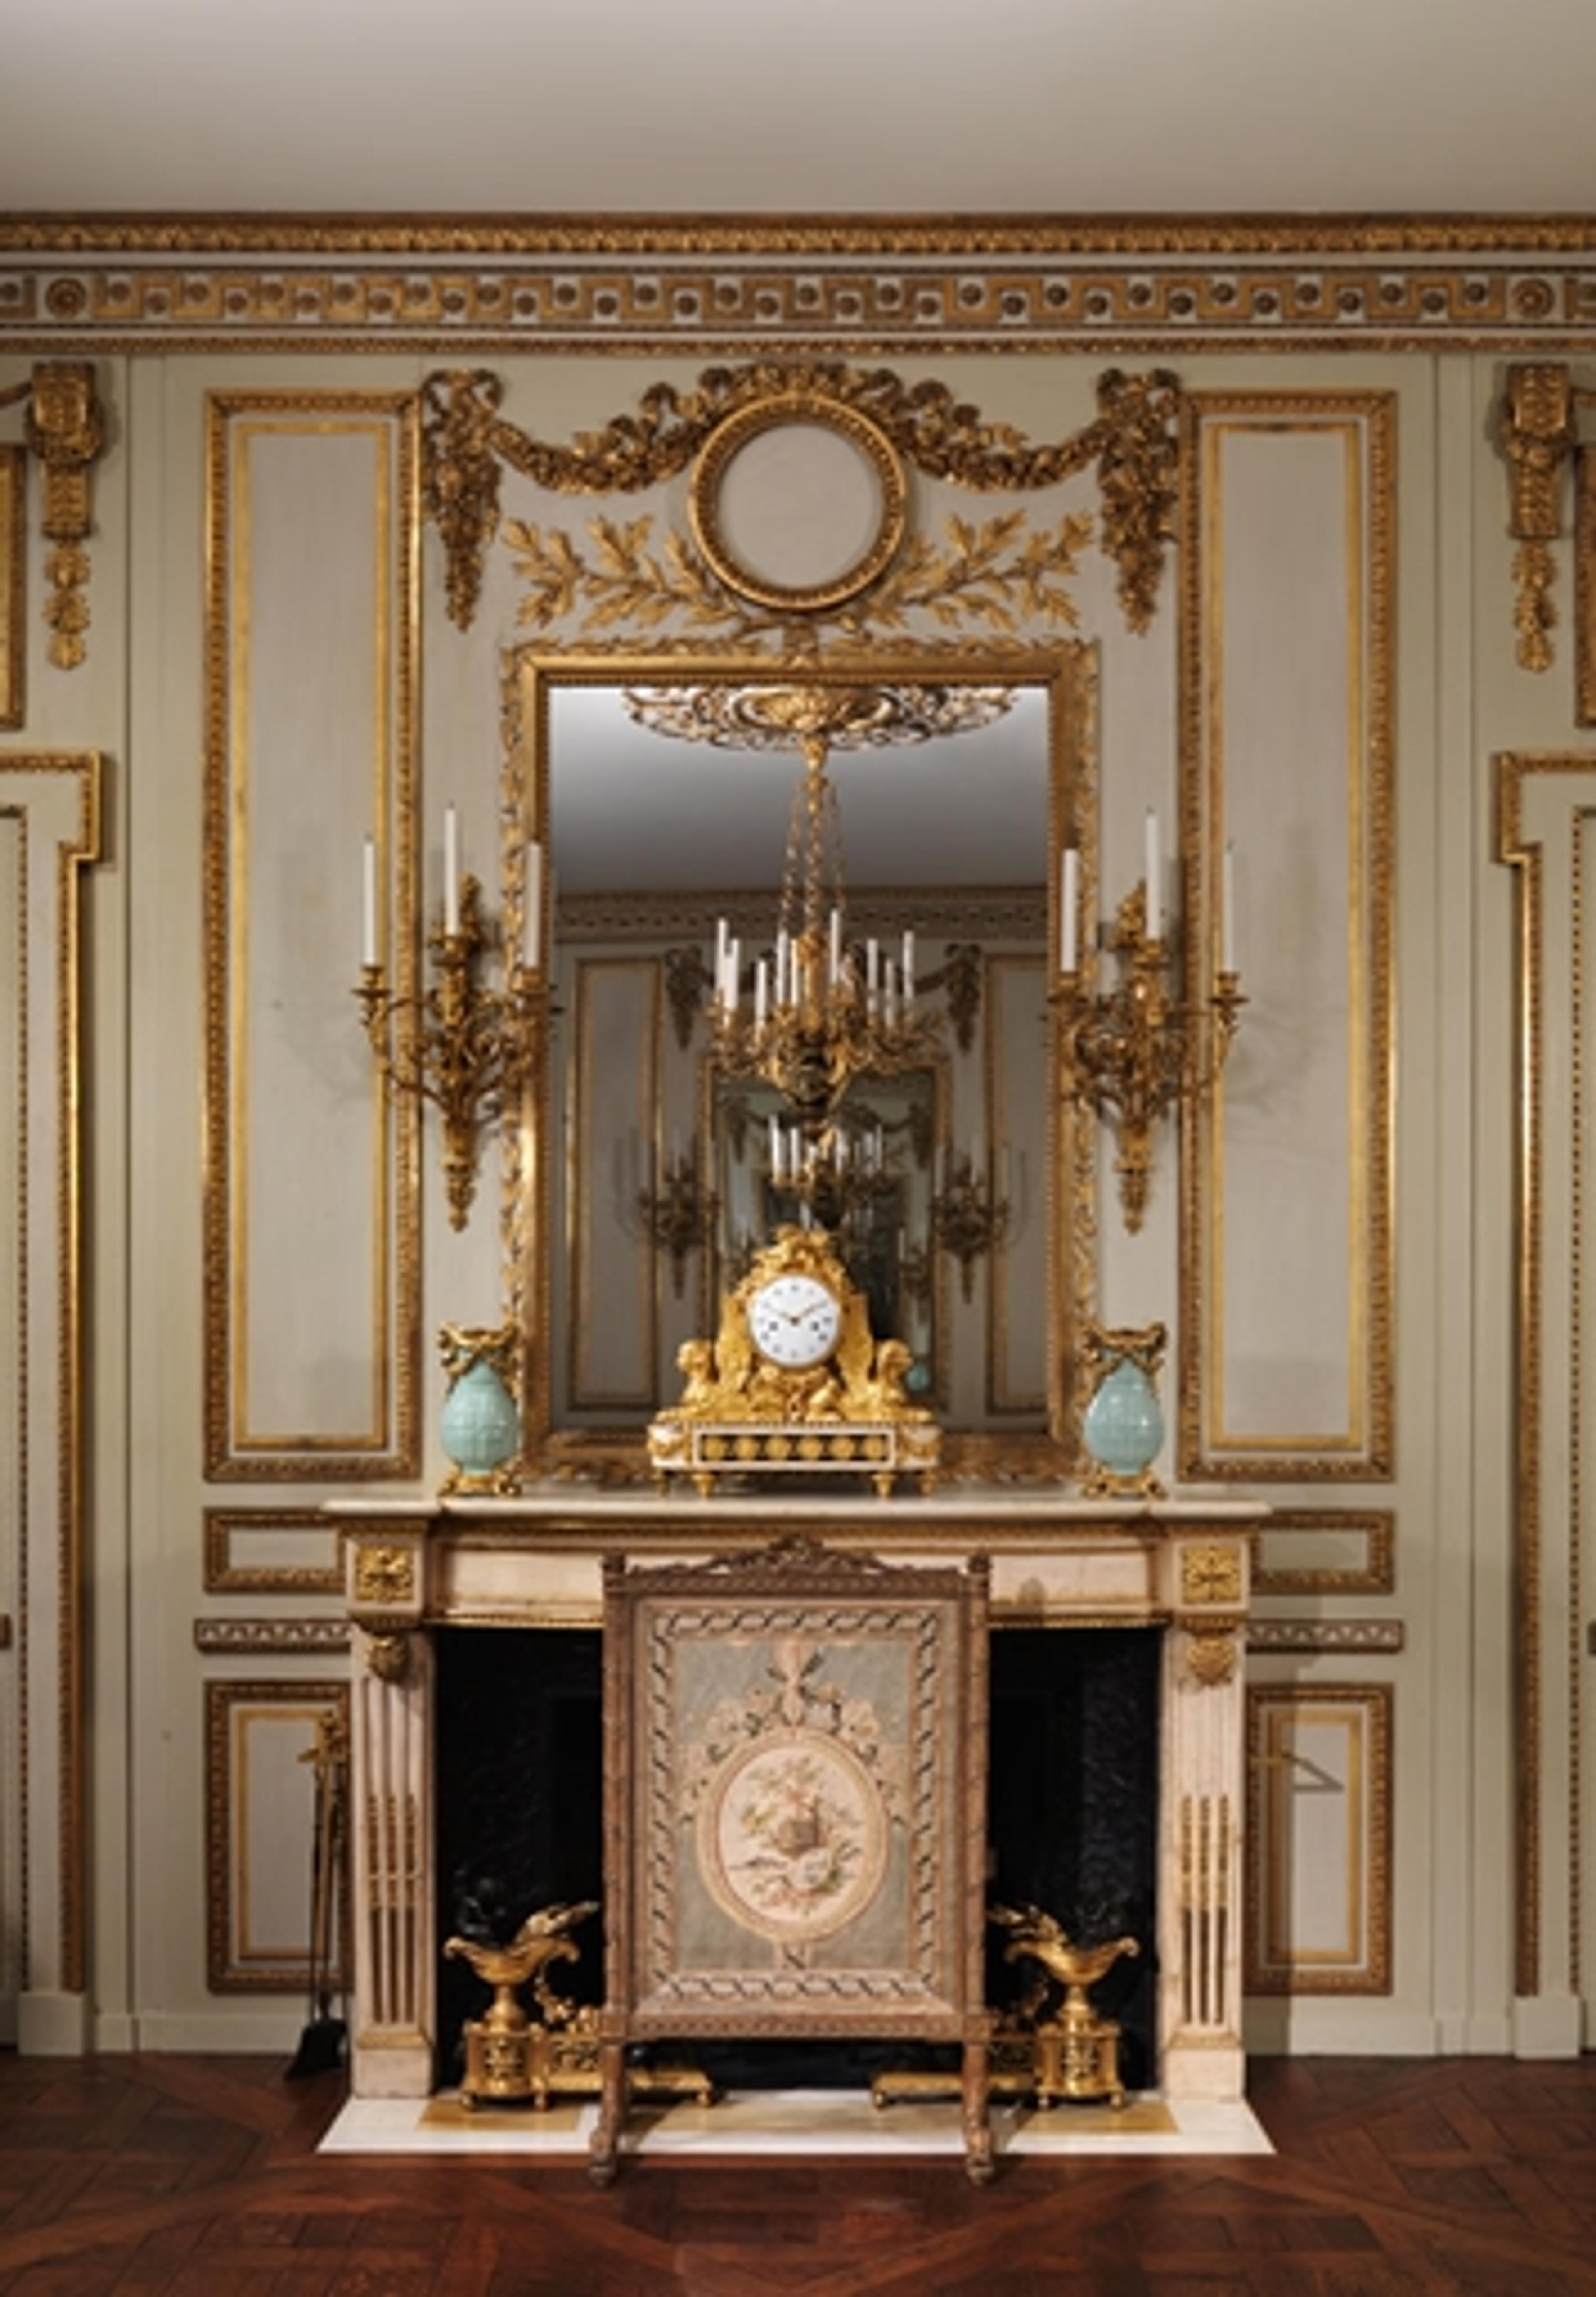 Installation view of the boiserie from the Hôtel de Cabris at The Met (view of the chimneypiece wall, fire screen, and clock)